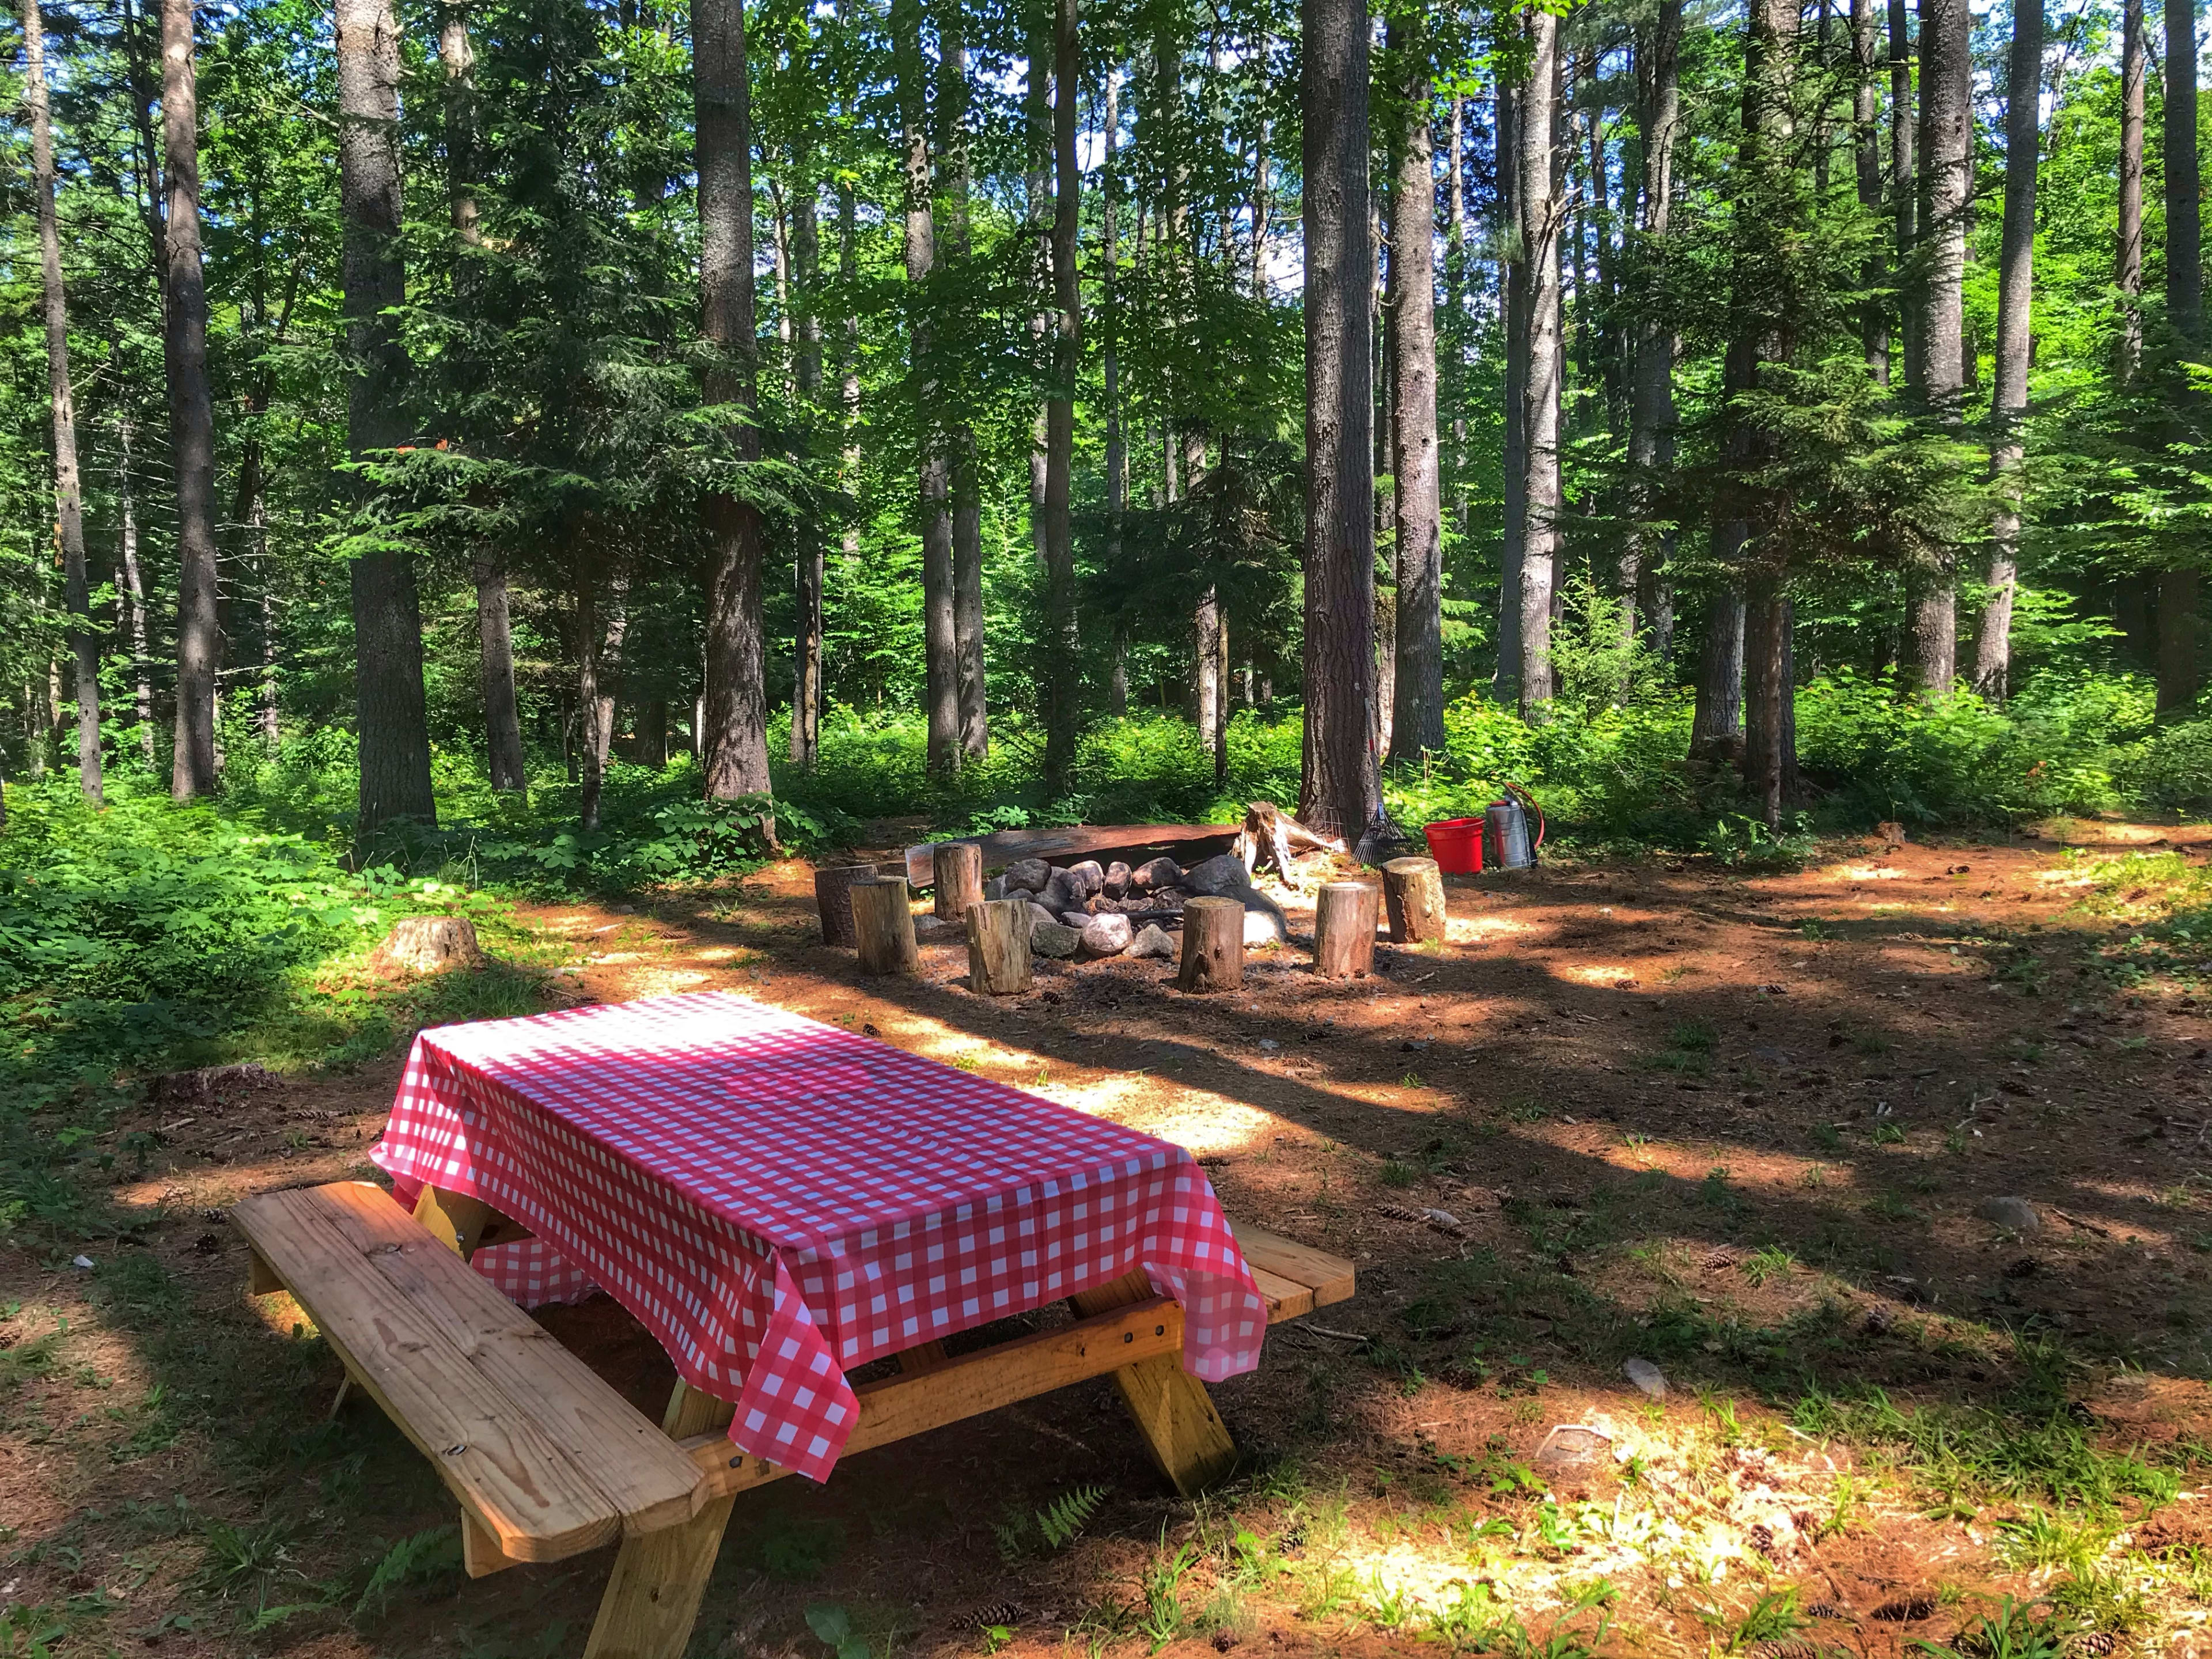 Lots of beautiful, quiet, privacy in the pines.